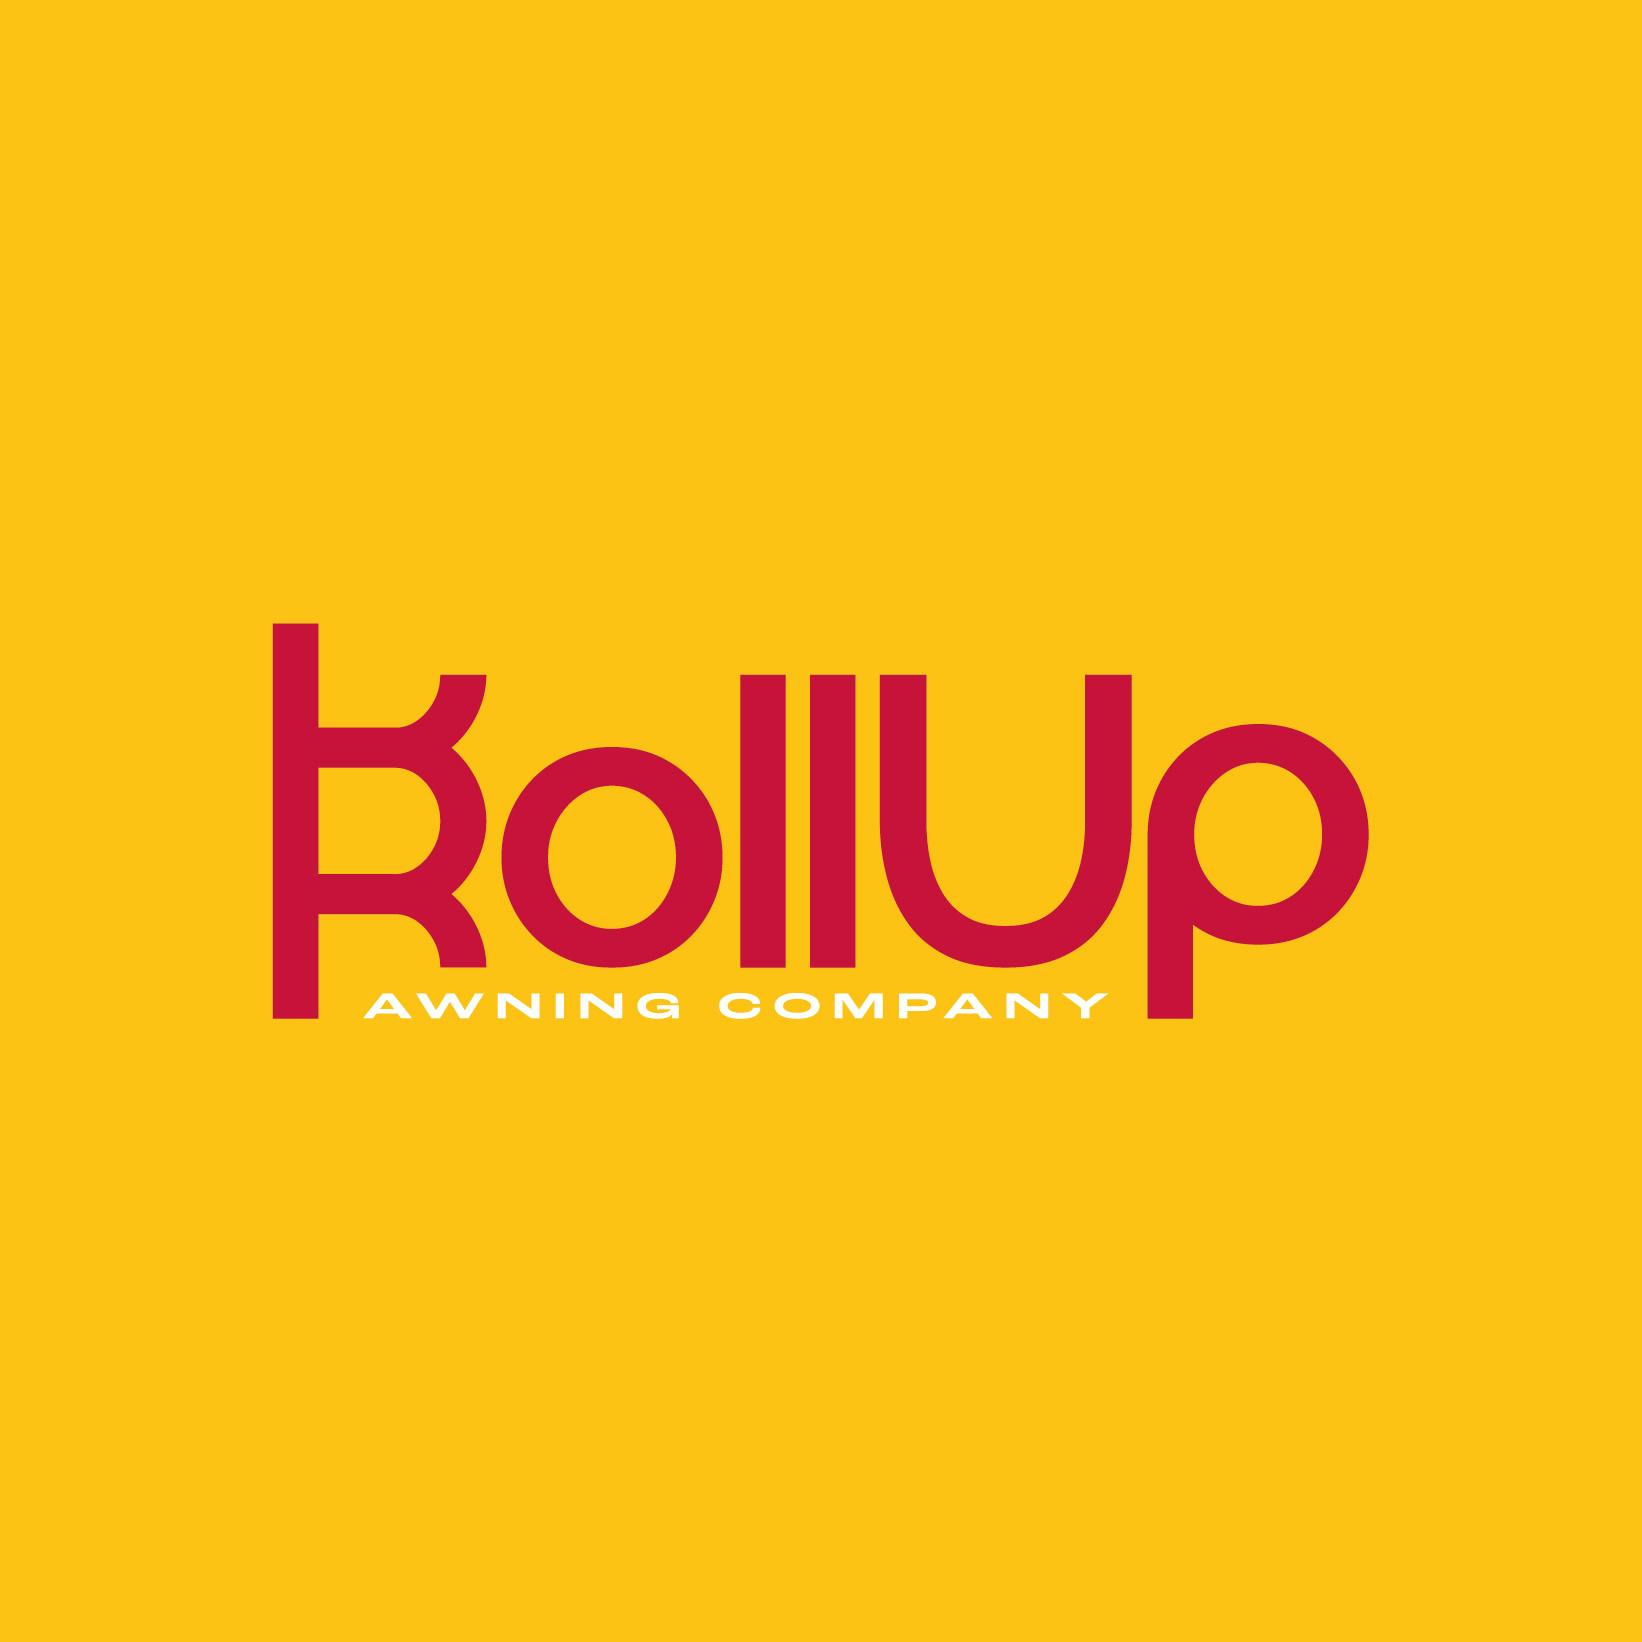 RollUp Awnings logo, red on Yellow background.